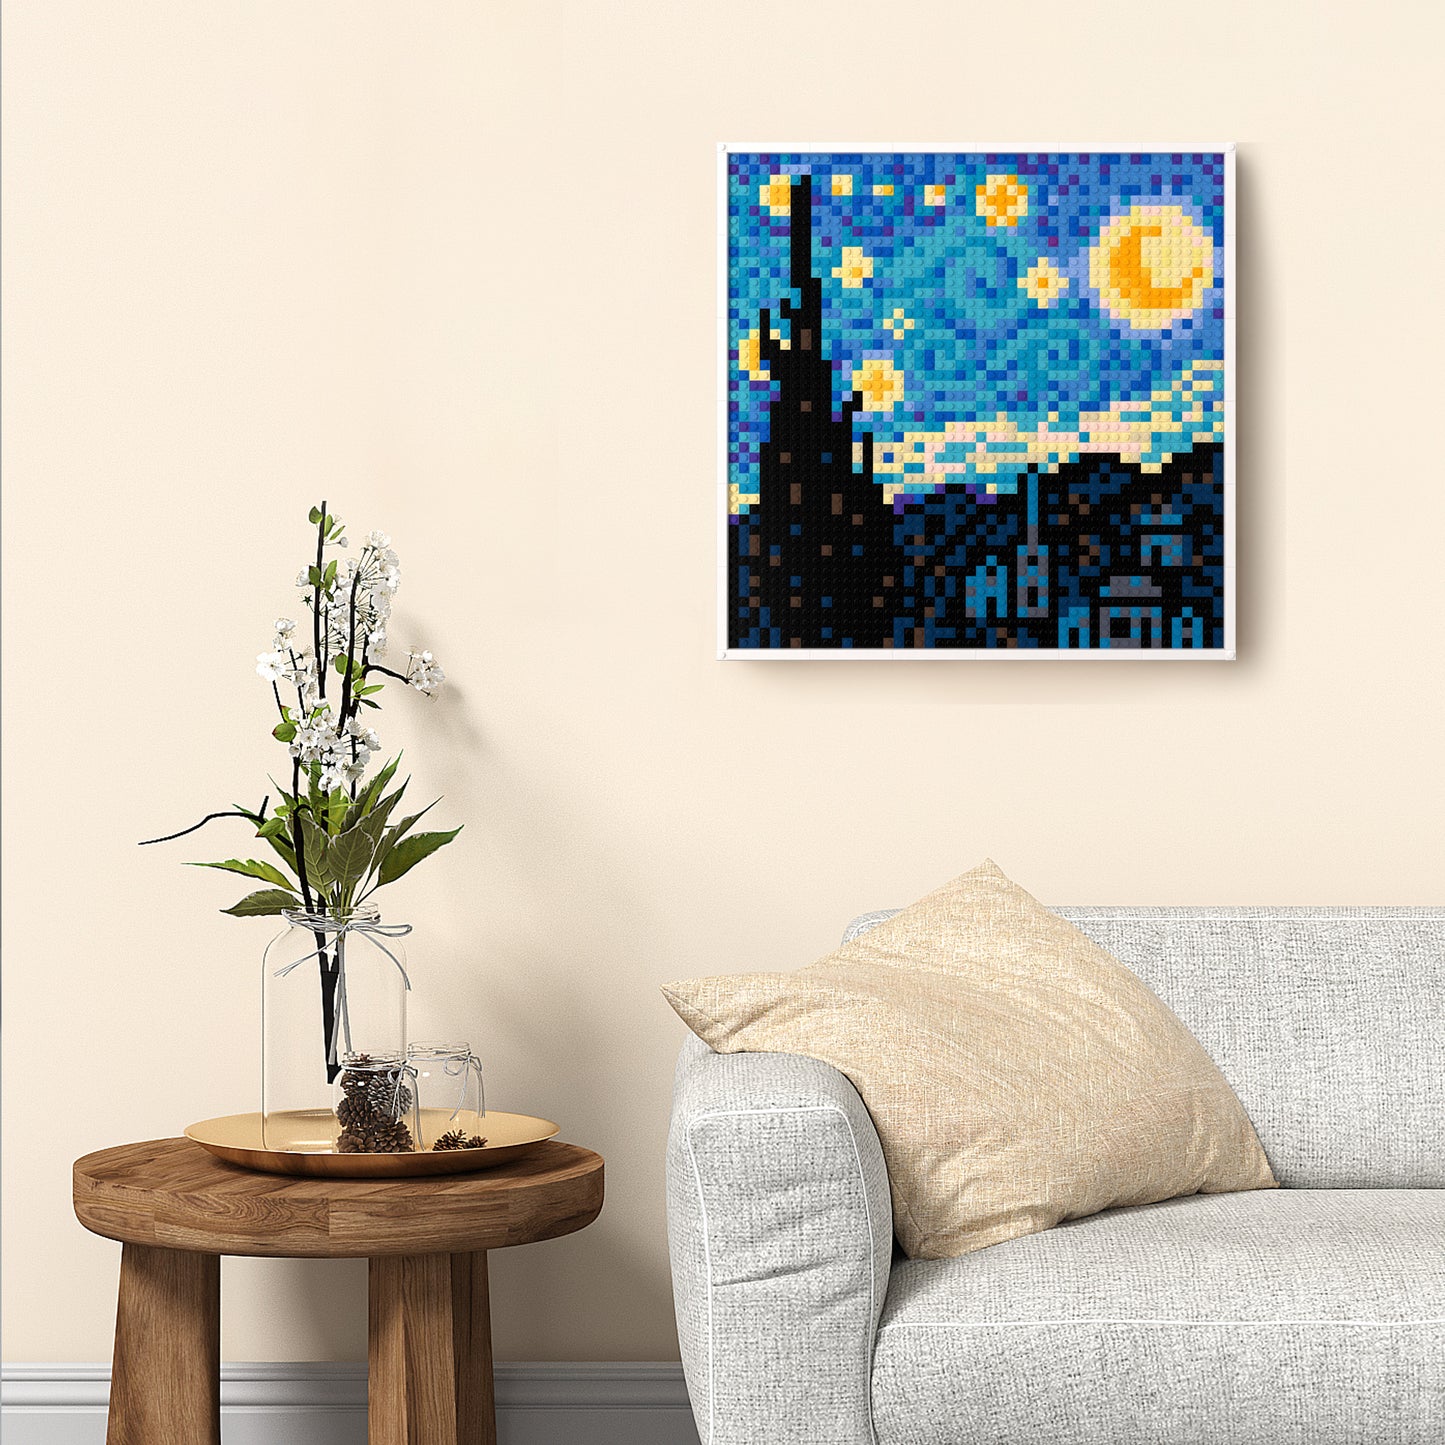 Van Gogh's The Starry Night, Post-Impressionist Masterpiece Pixel Reproduction, Large Lego Compatible Building Blocks DIY Jigsaw Puzzle